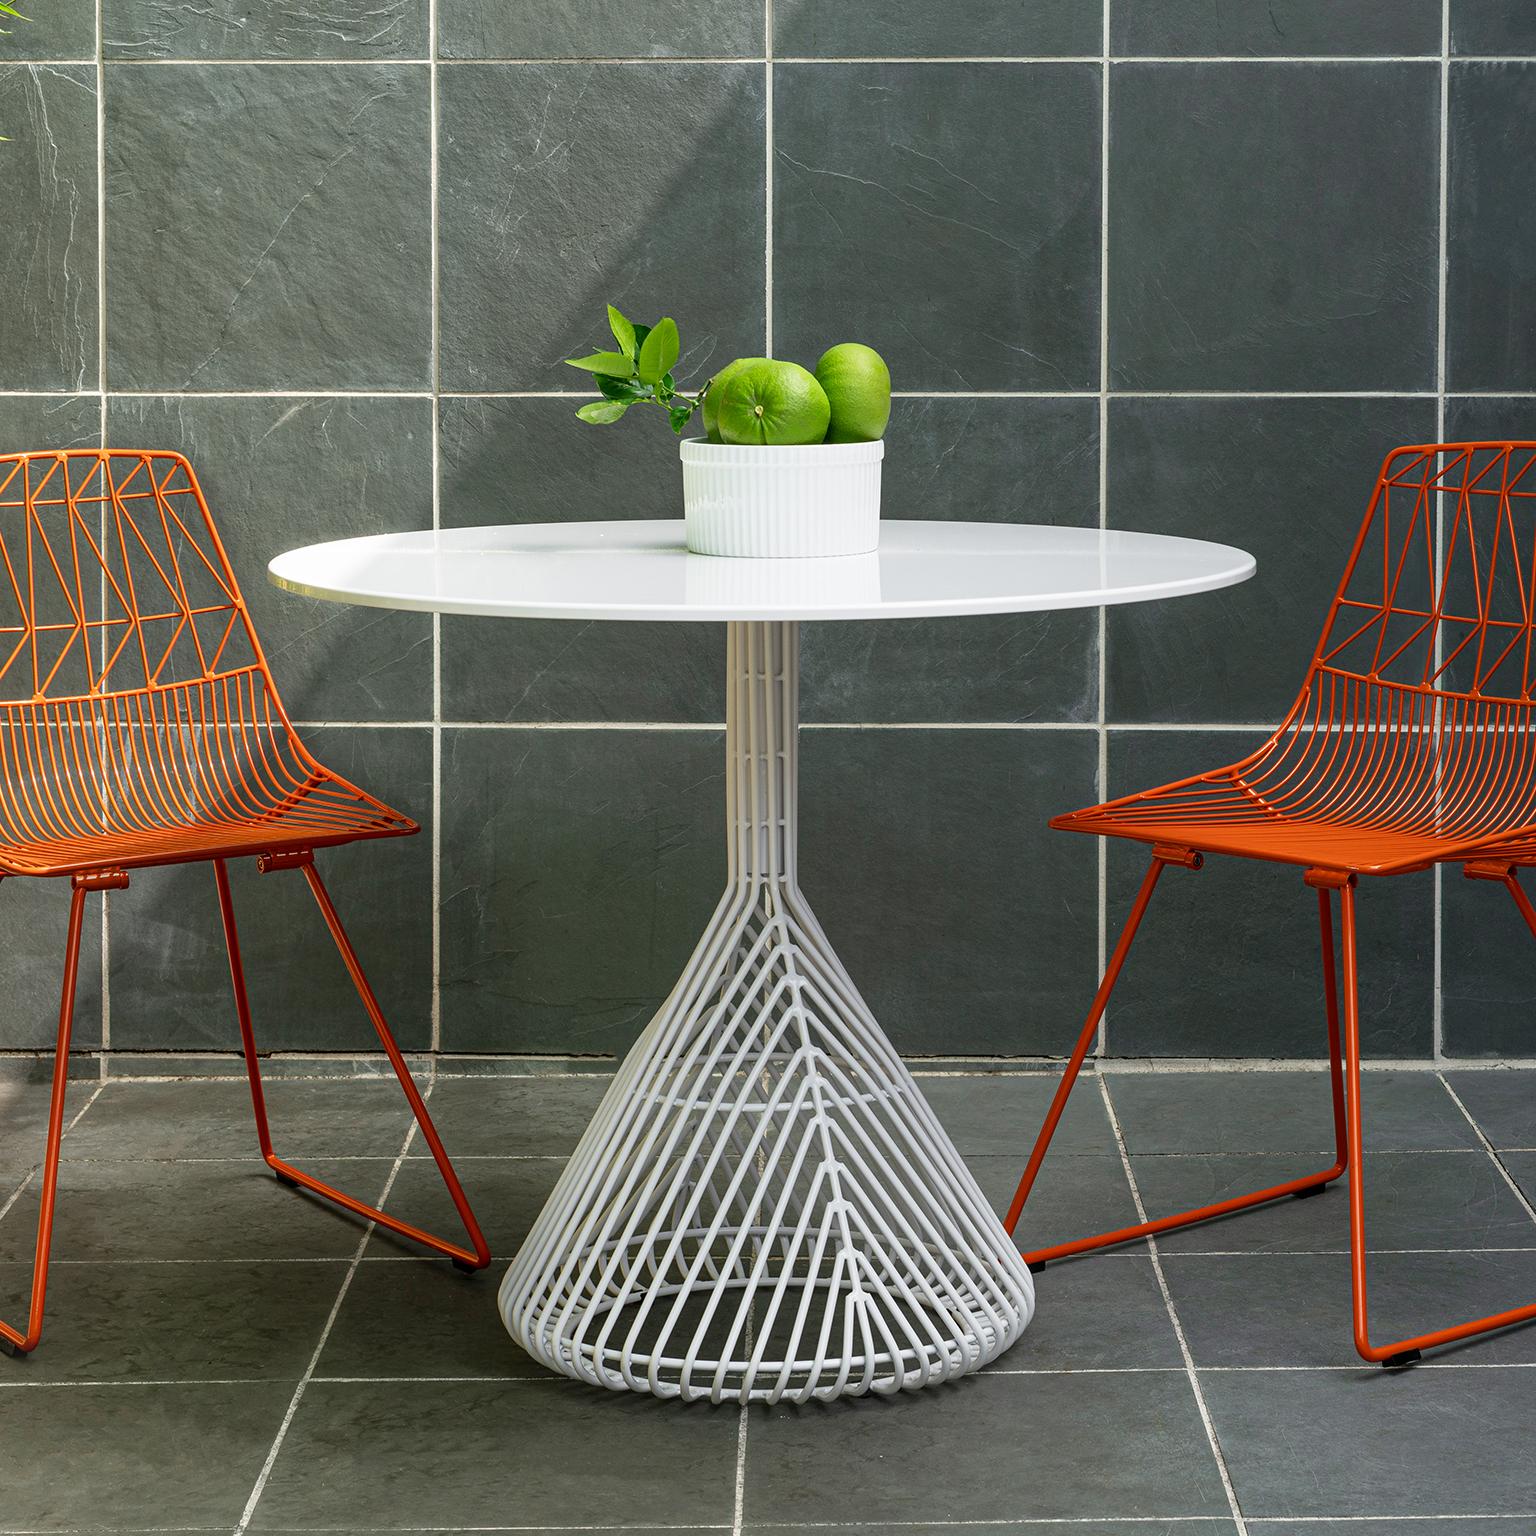 Bend Goods wire furniture
This modern wire dining table updates the outdoor bistro shape with a tightly knit base that is durable and sculptural. The bistro table is a callback to a Classic design with a contemporary twist that works inside or